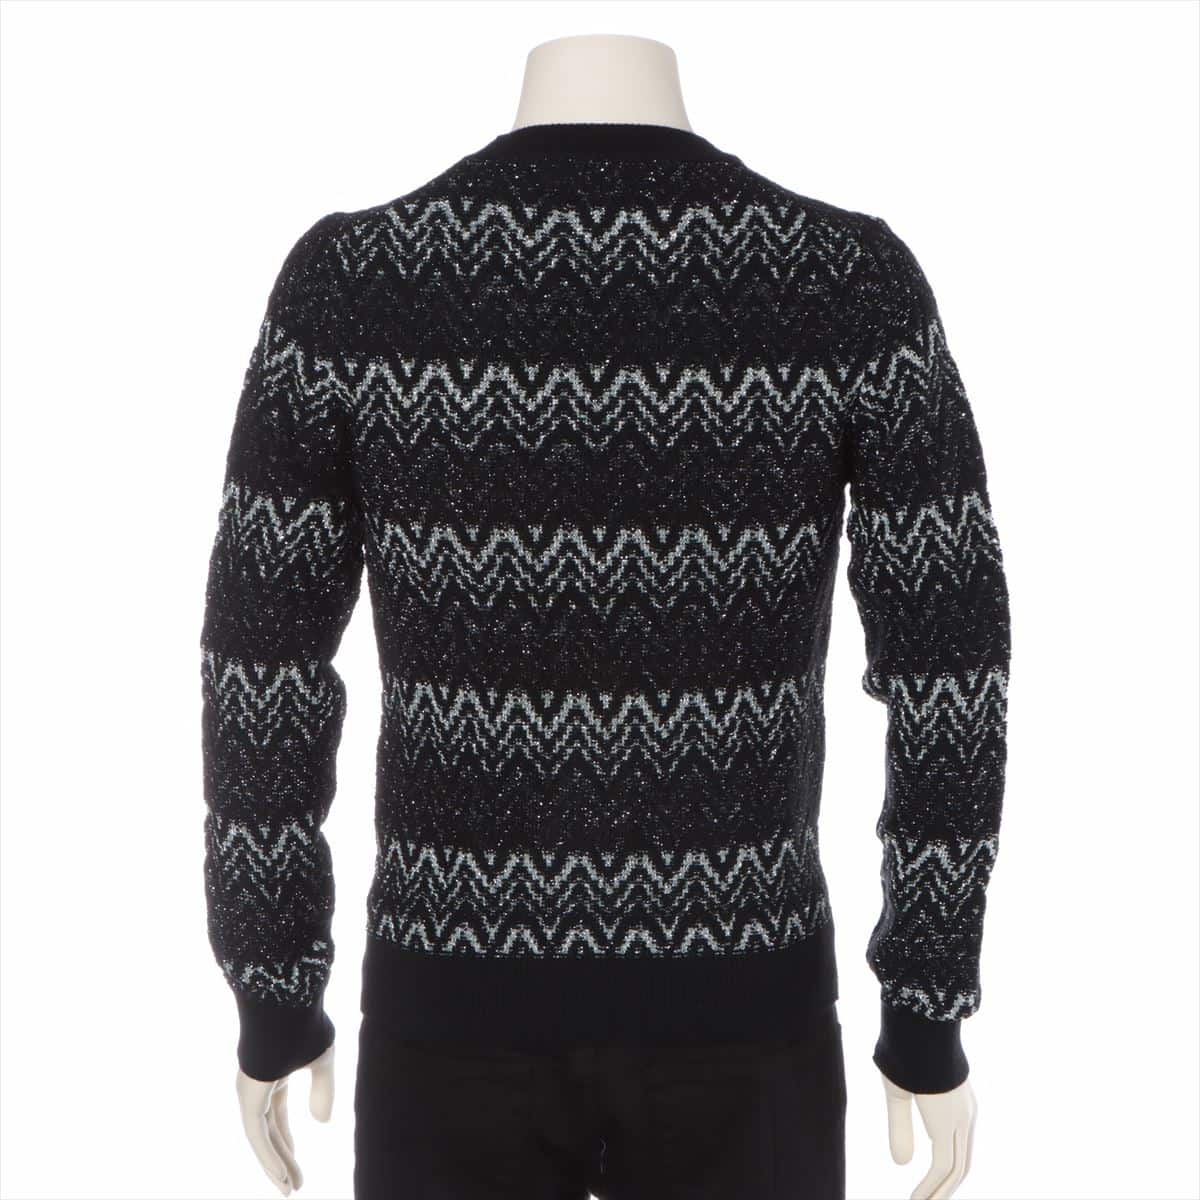 Saint Laurent Paris 18AW Wool Sweater XS Men's Black x Gray  Glitter Tag frayed on one side